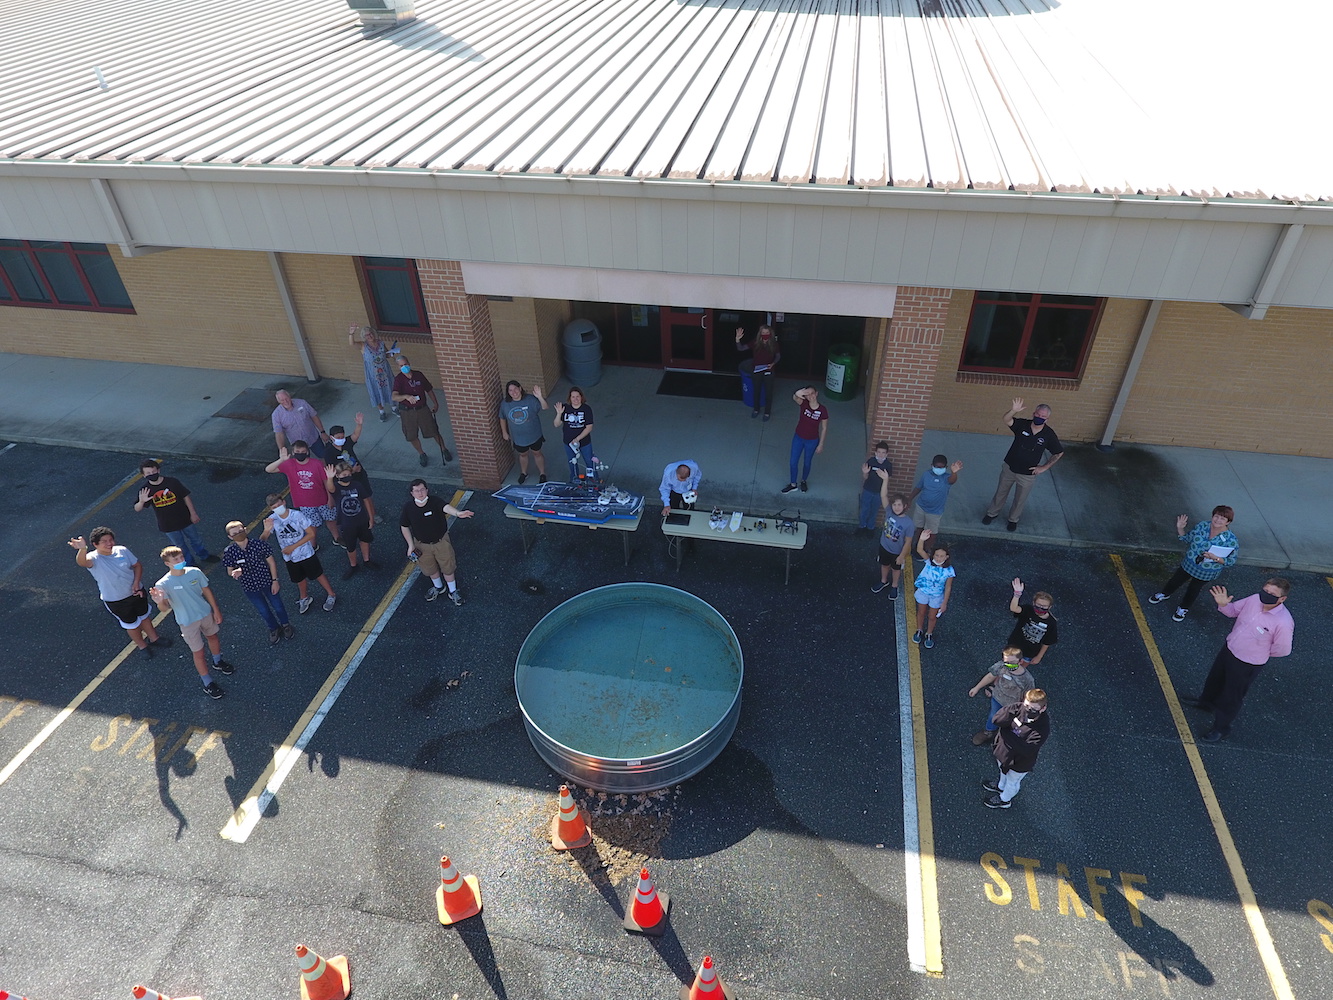 Drone Image at the Science Building